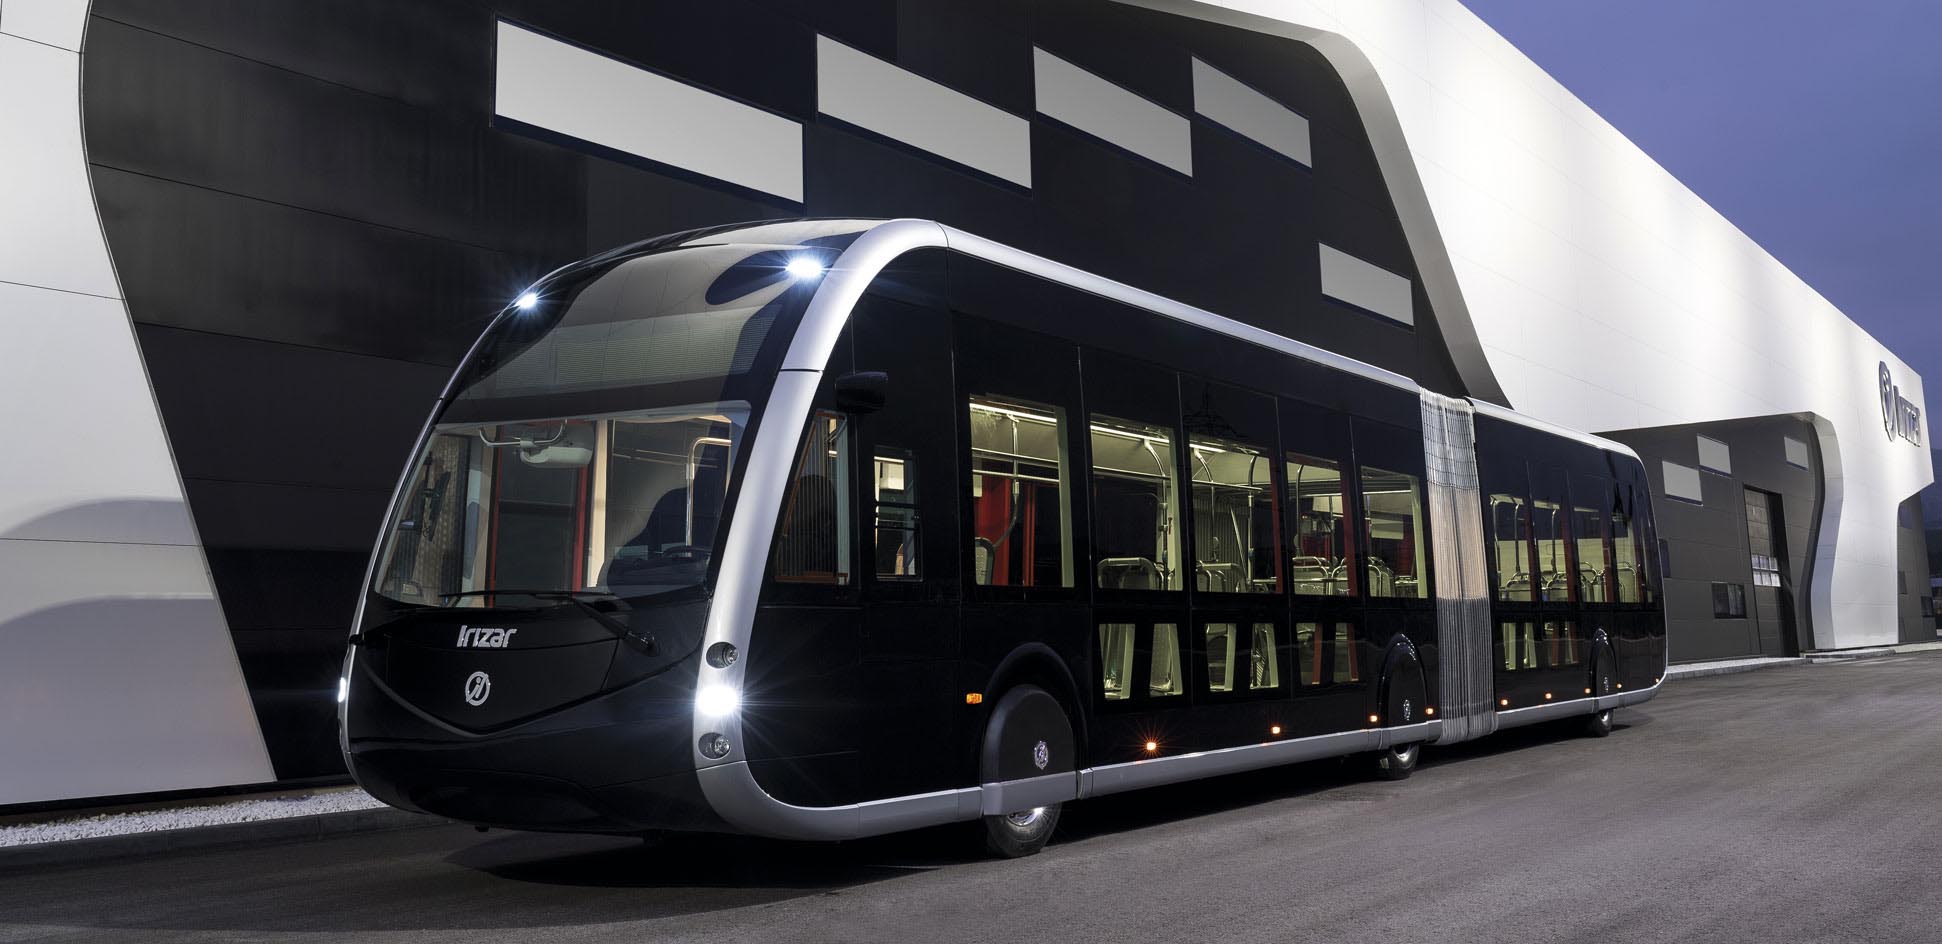 30 Zero-emissions buses by Irizar e-mobility for Valladolid